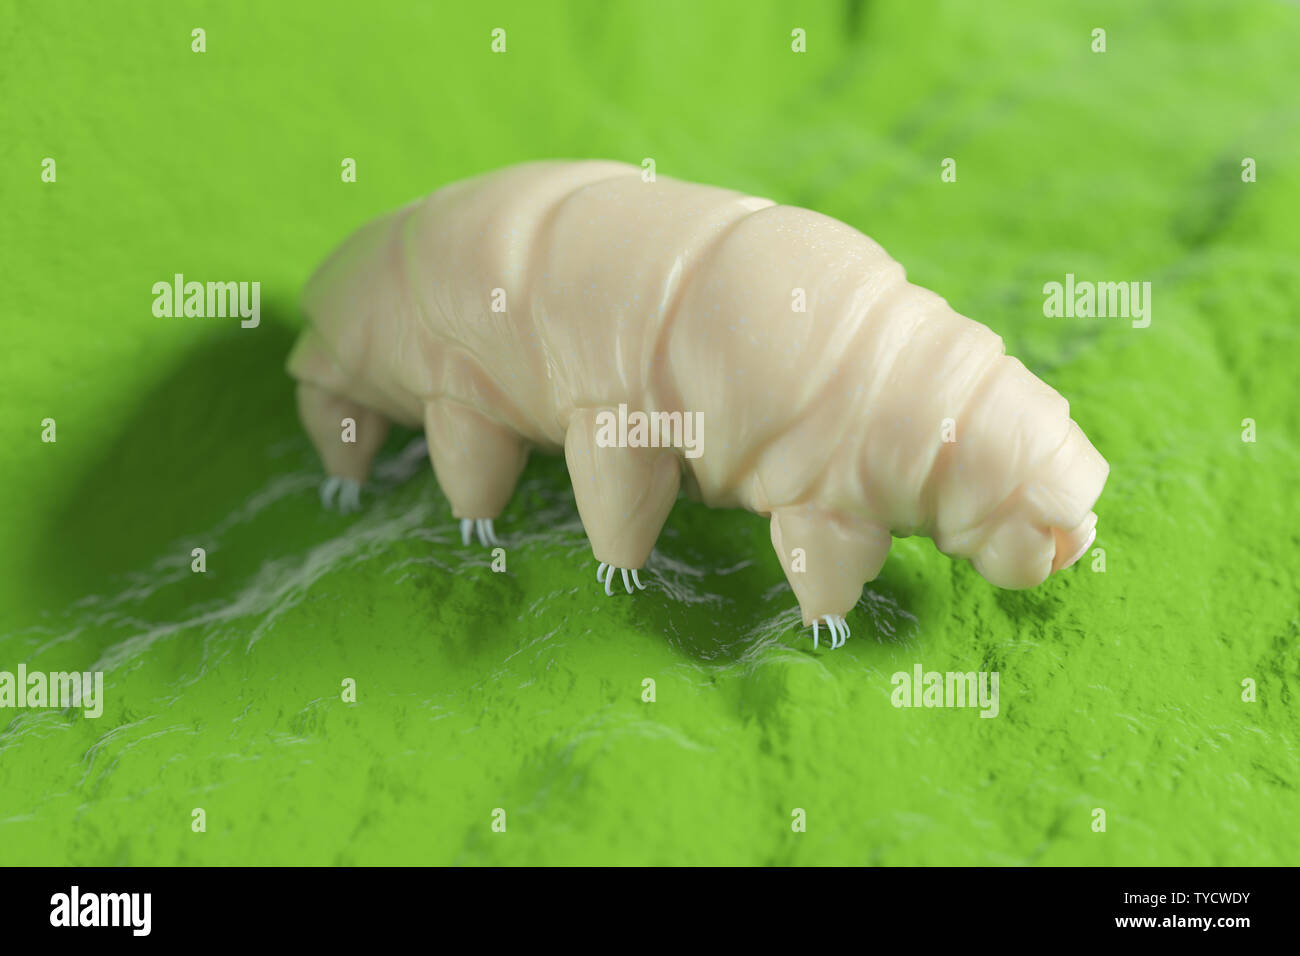 3d rendered medically accurate illustration of a waterbear Stock Photo